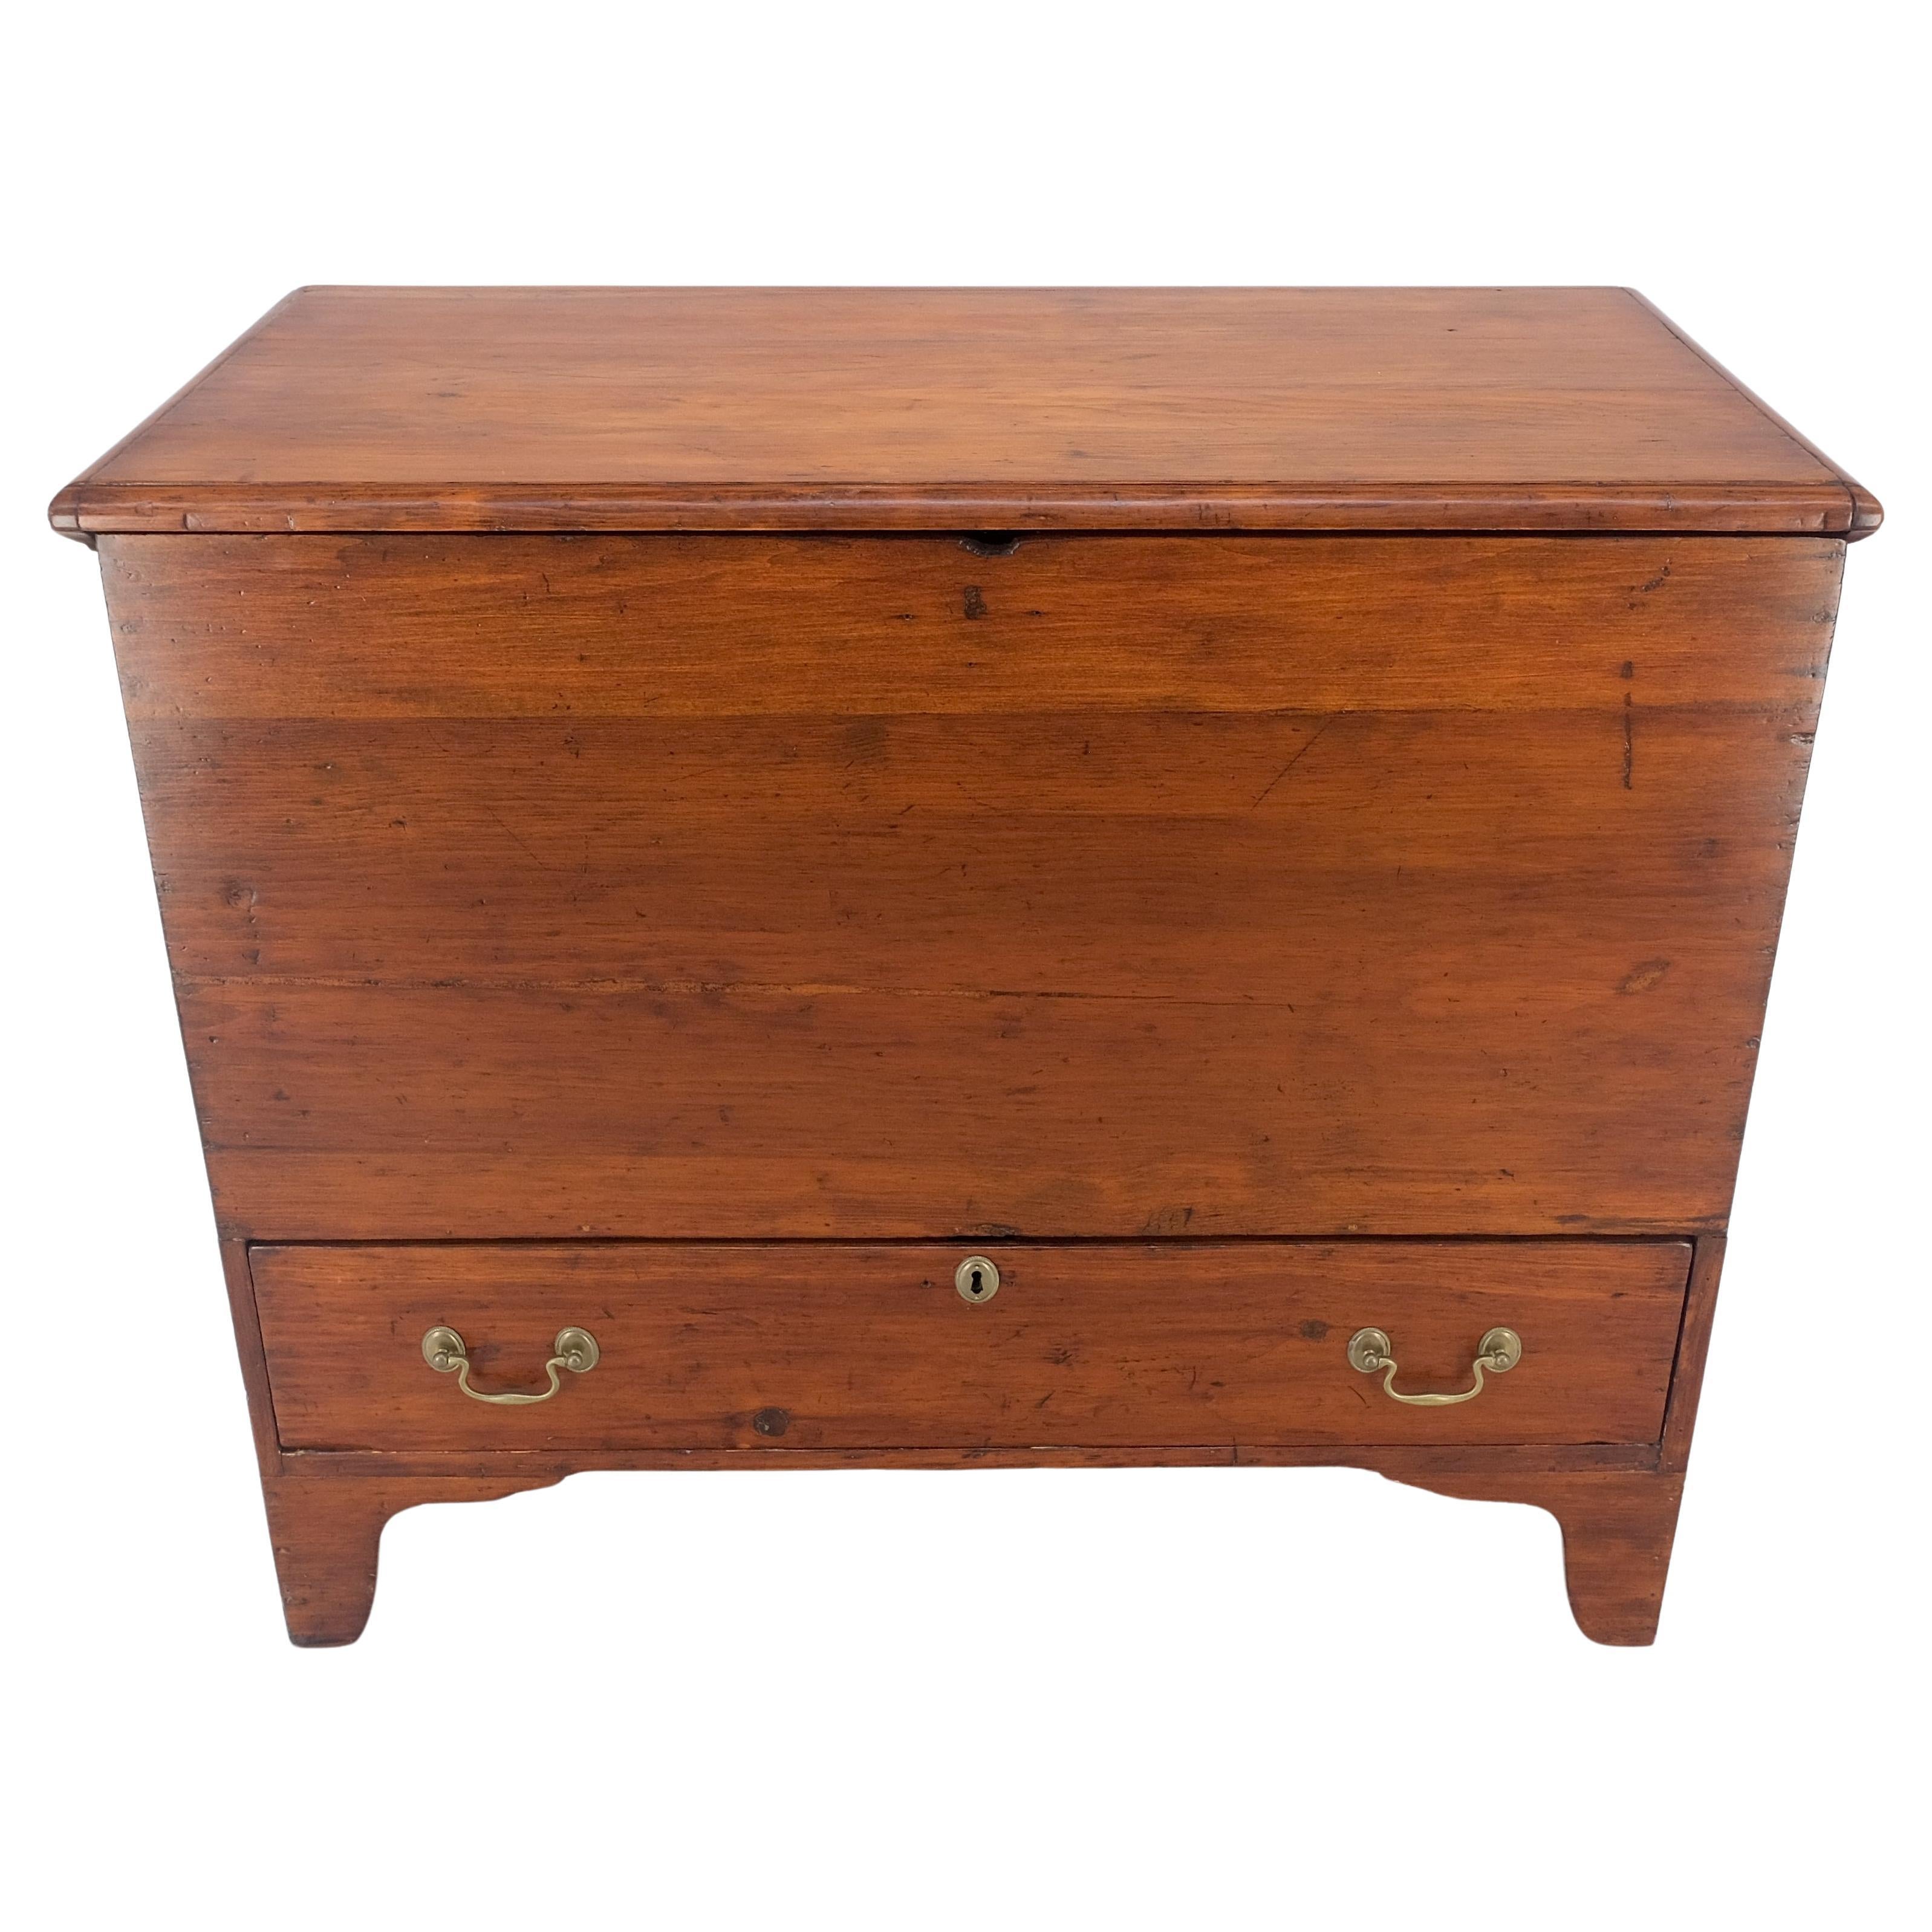 Solid Cherry Bottom Dovetails Drawer Brass Hardware Hope Chest Cabinet Patina For Sale